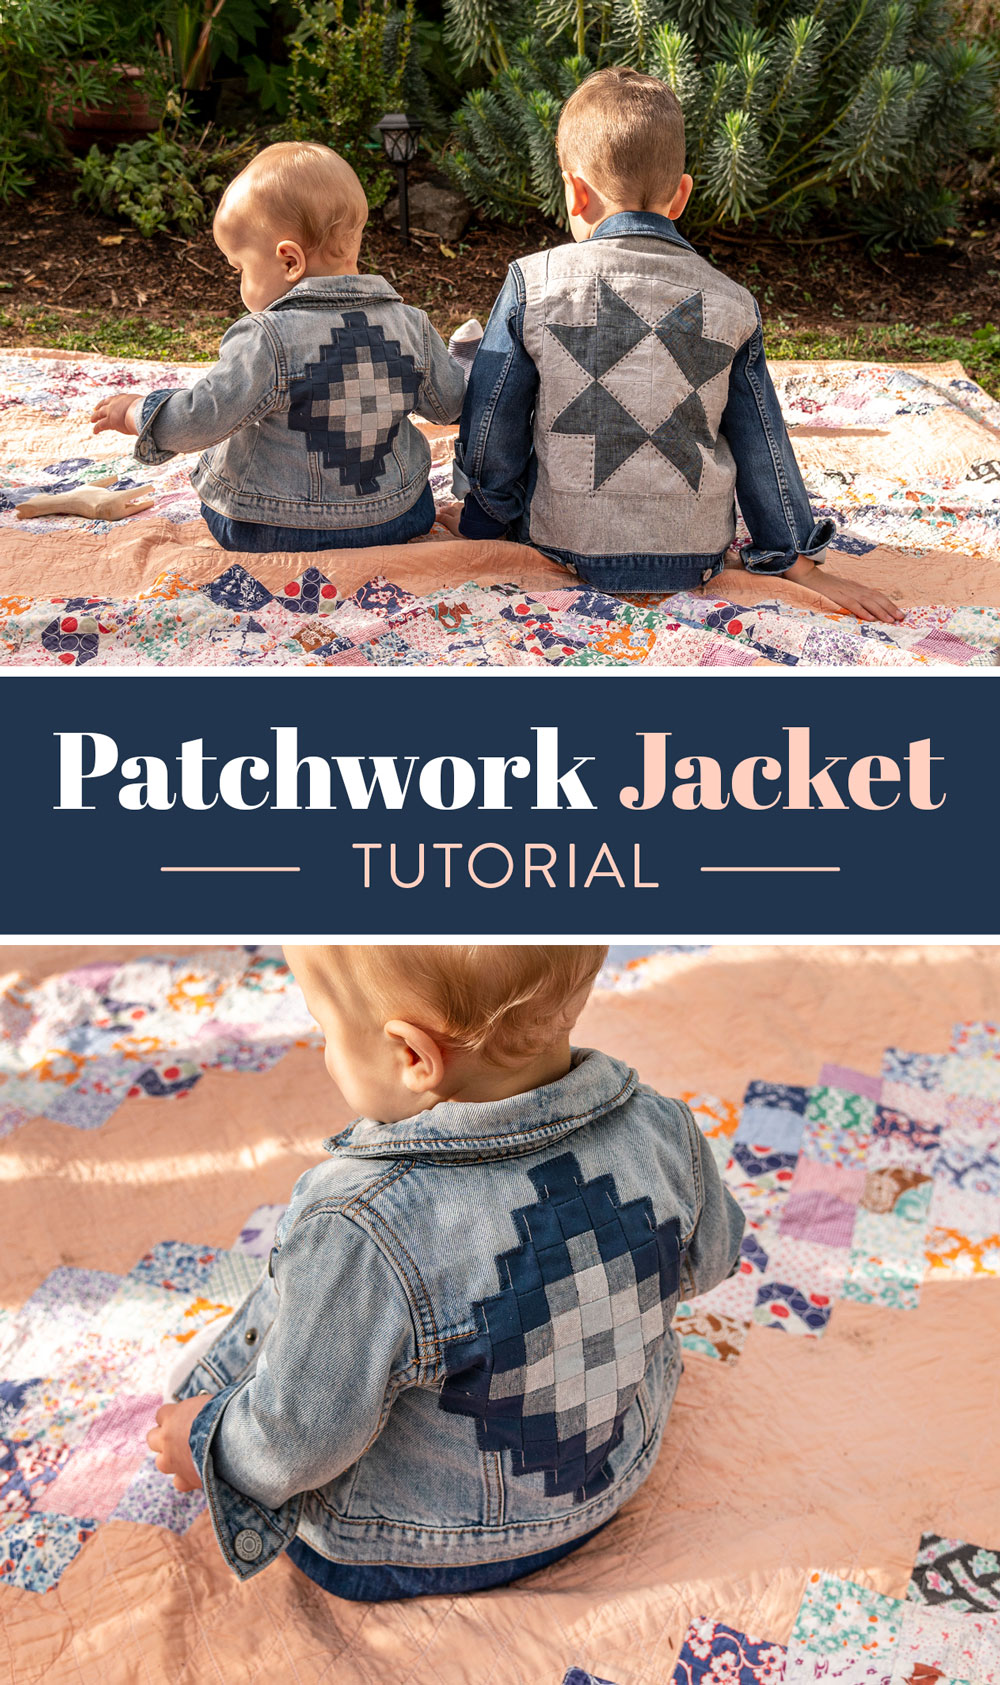 This simple patchwork jacket tutorial is the perfect way to breathe new life into old clothes. Upcycle denim or old clothing to make quilted clothing! suzyquilts.com #upcycleclothing #patchworkjacket